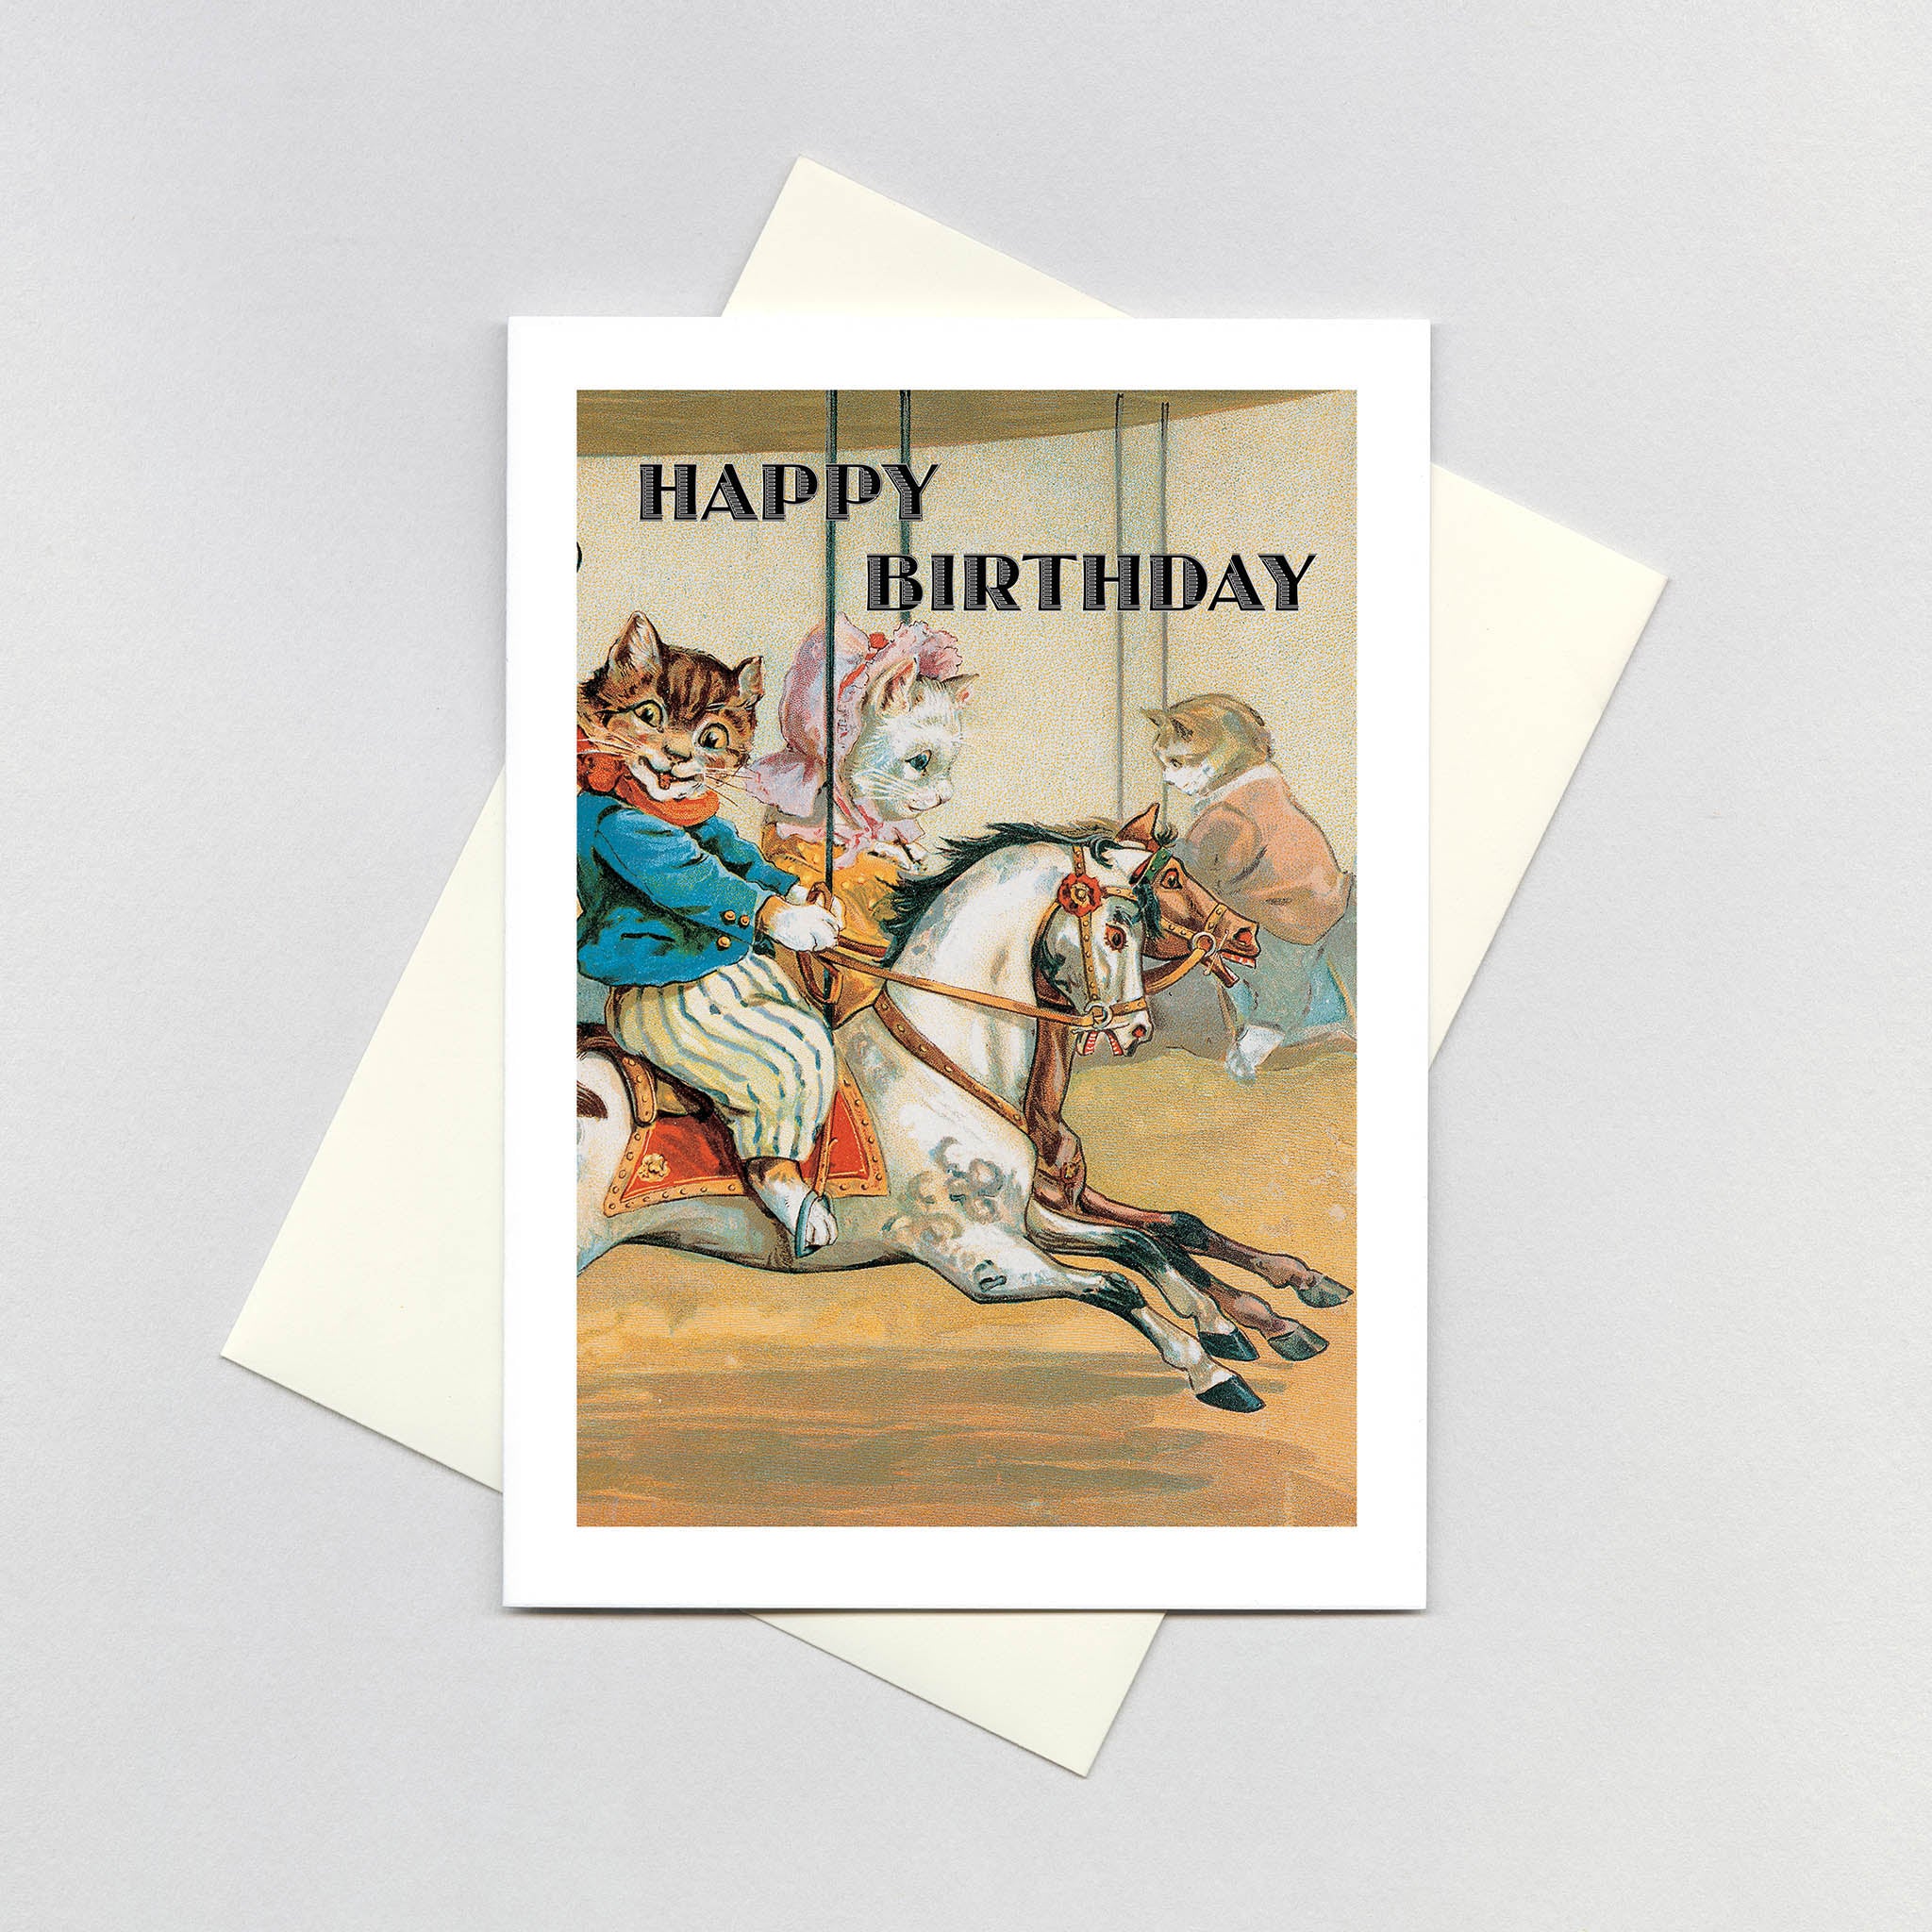 Elephant　–　Carousel　Birthday　Cats　Card　Laughing　Riding　Greeting